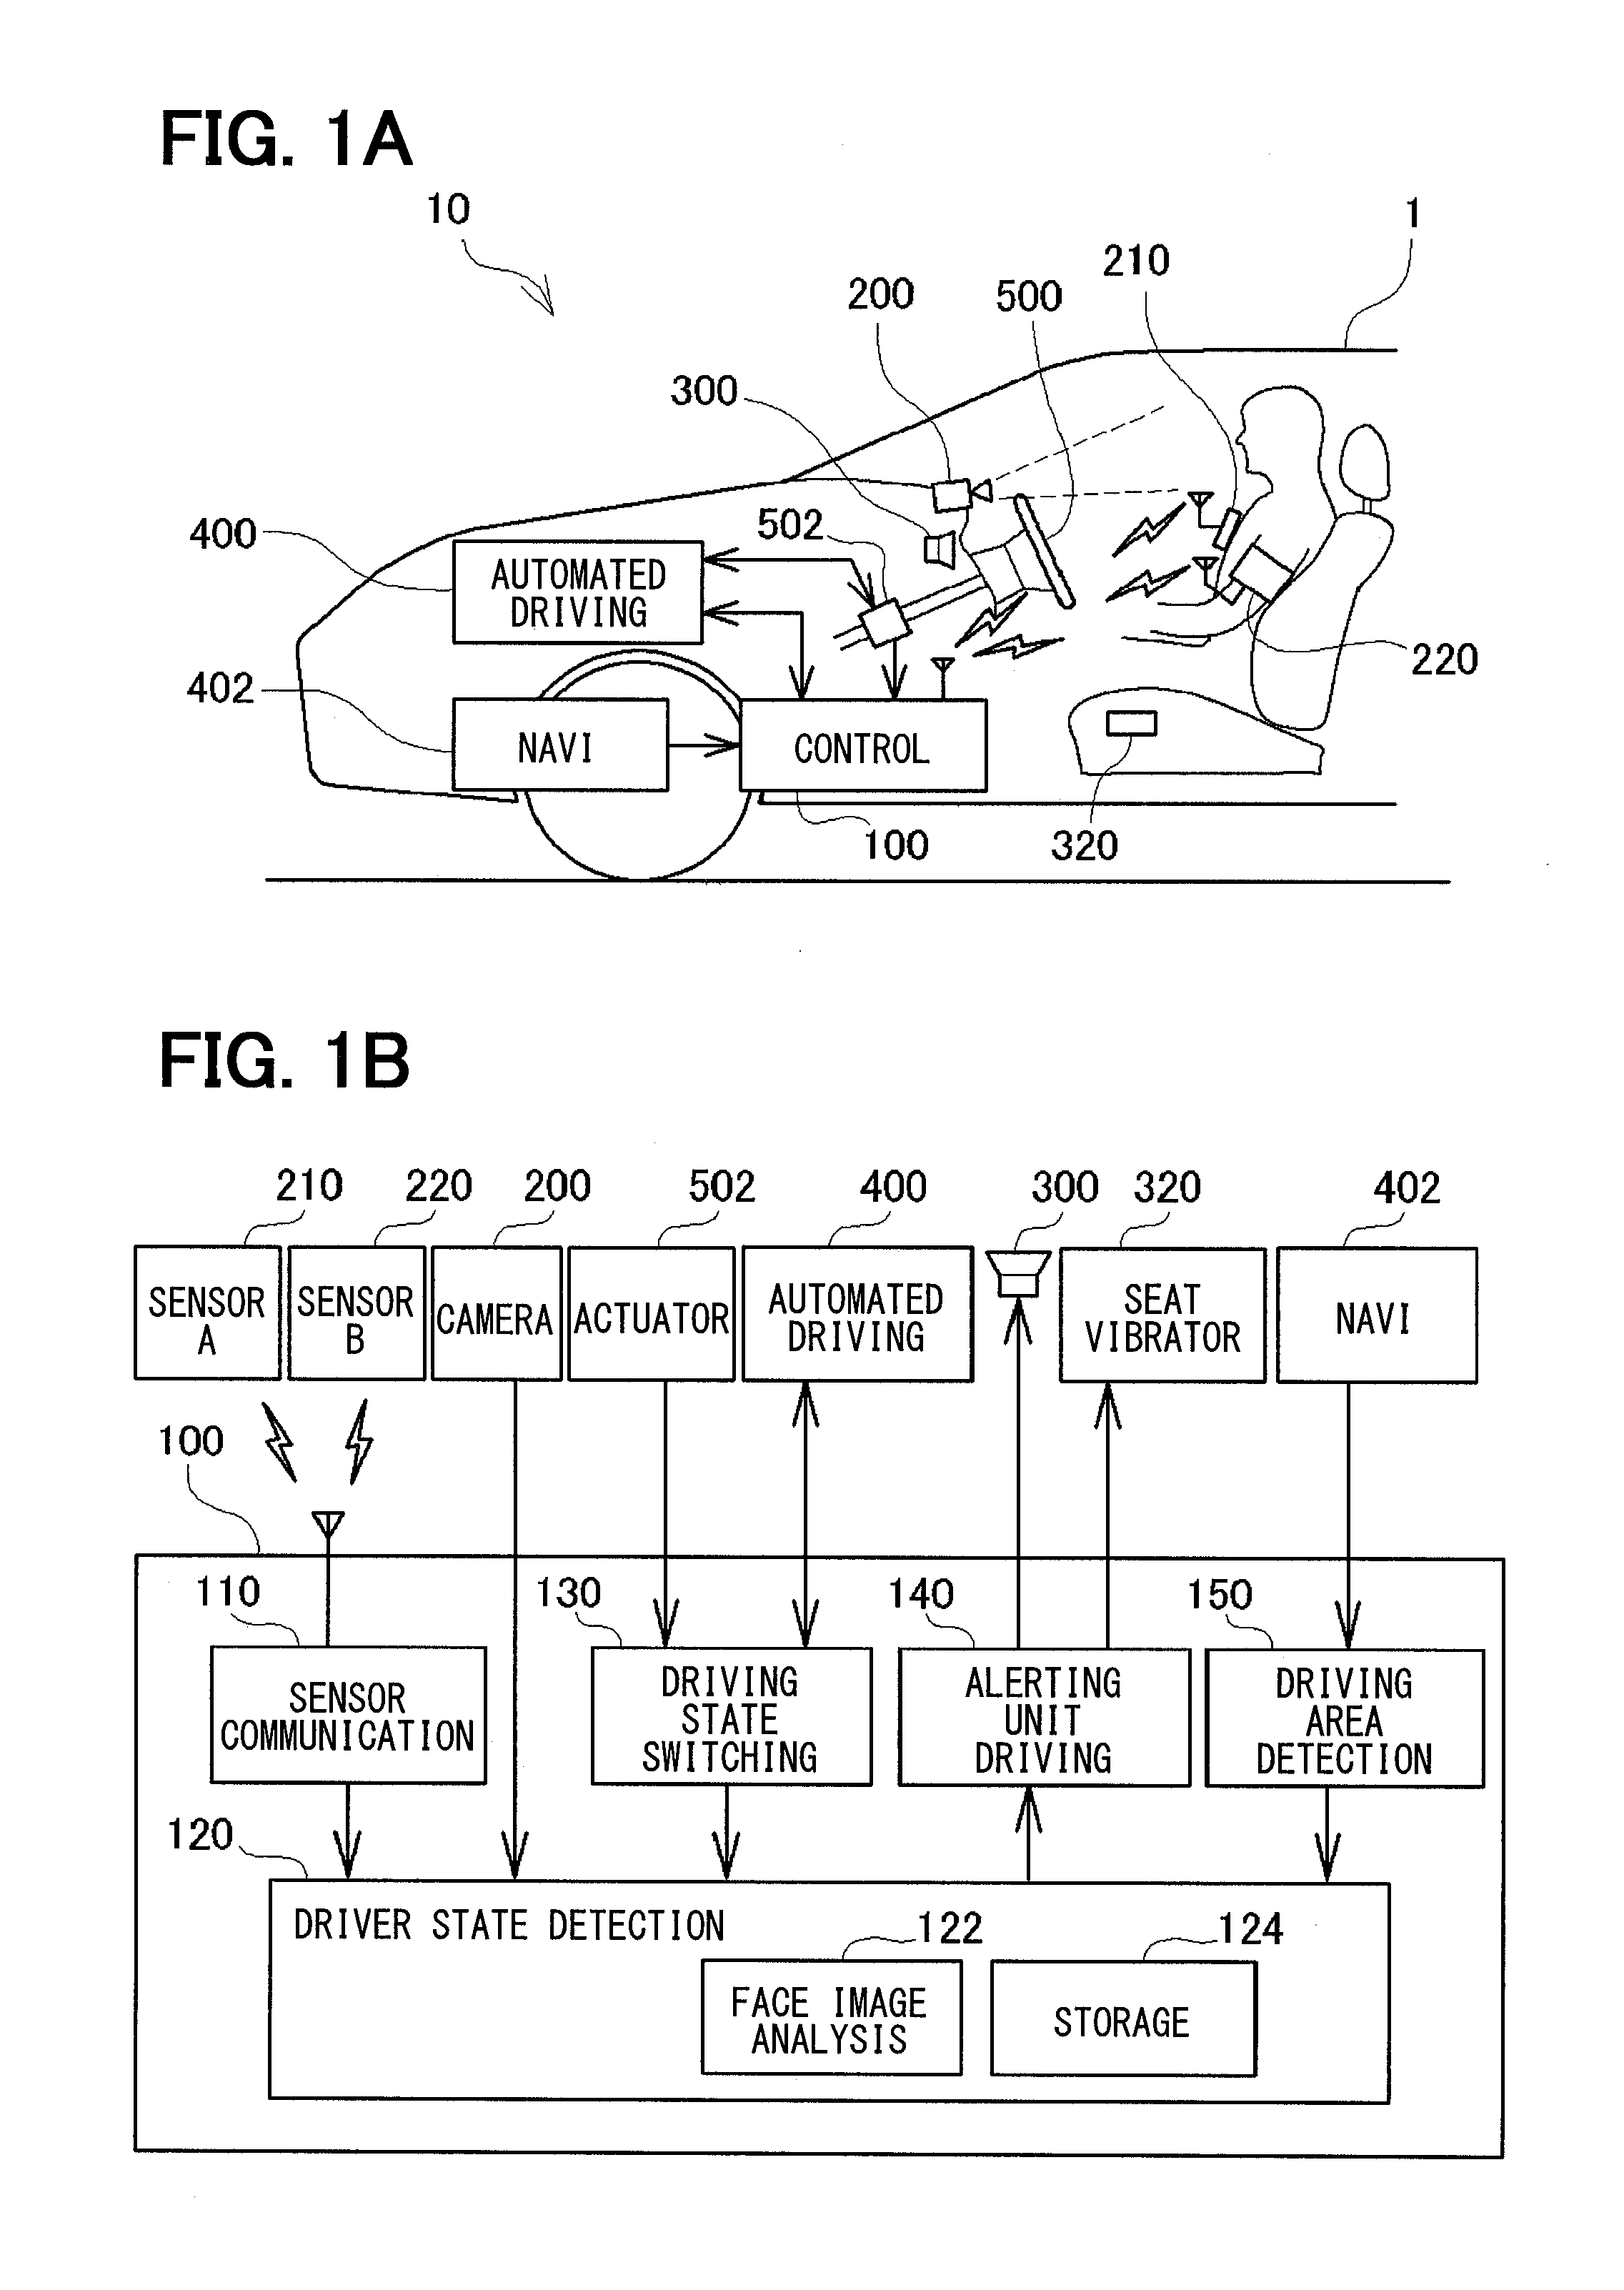 Driving assist device